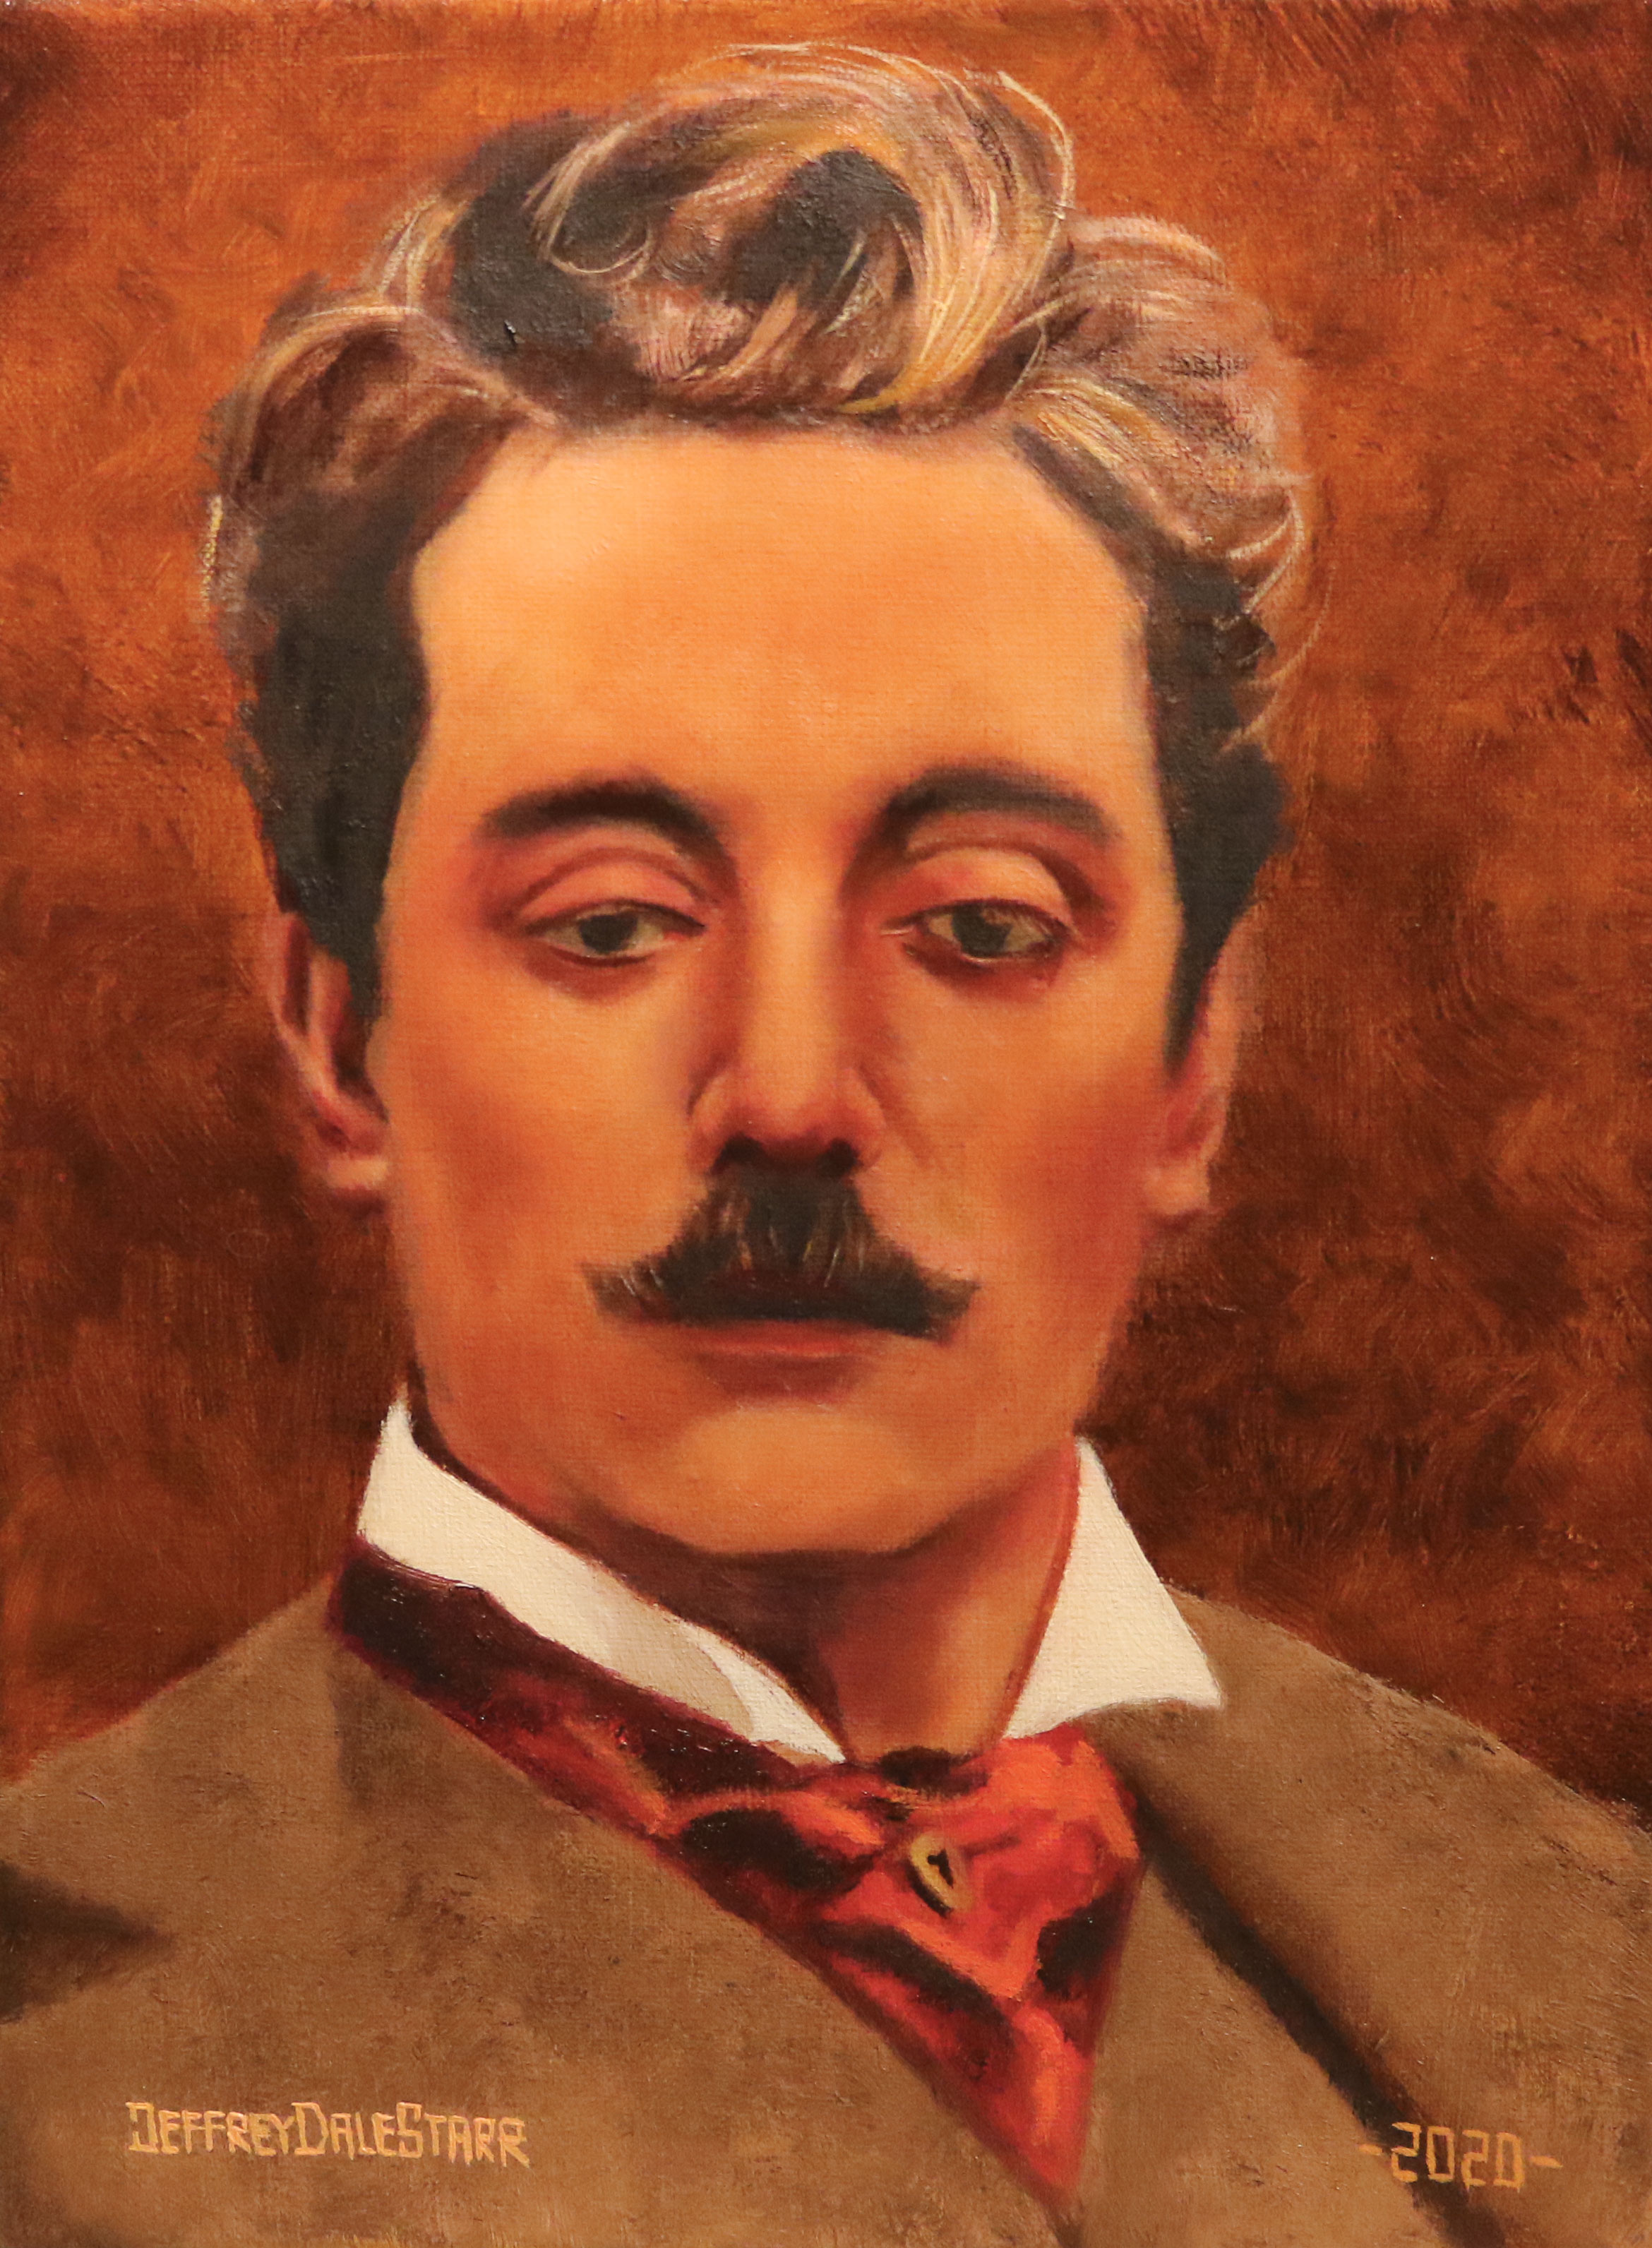 Oil painting "Giacomo Puccini" by Jeffrey Dale Starr